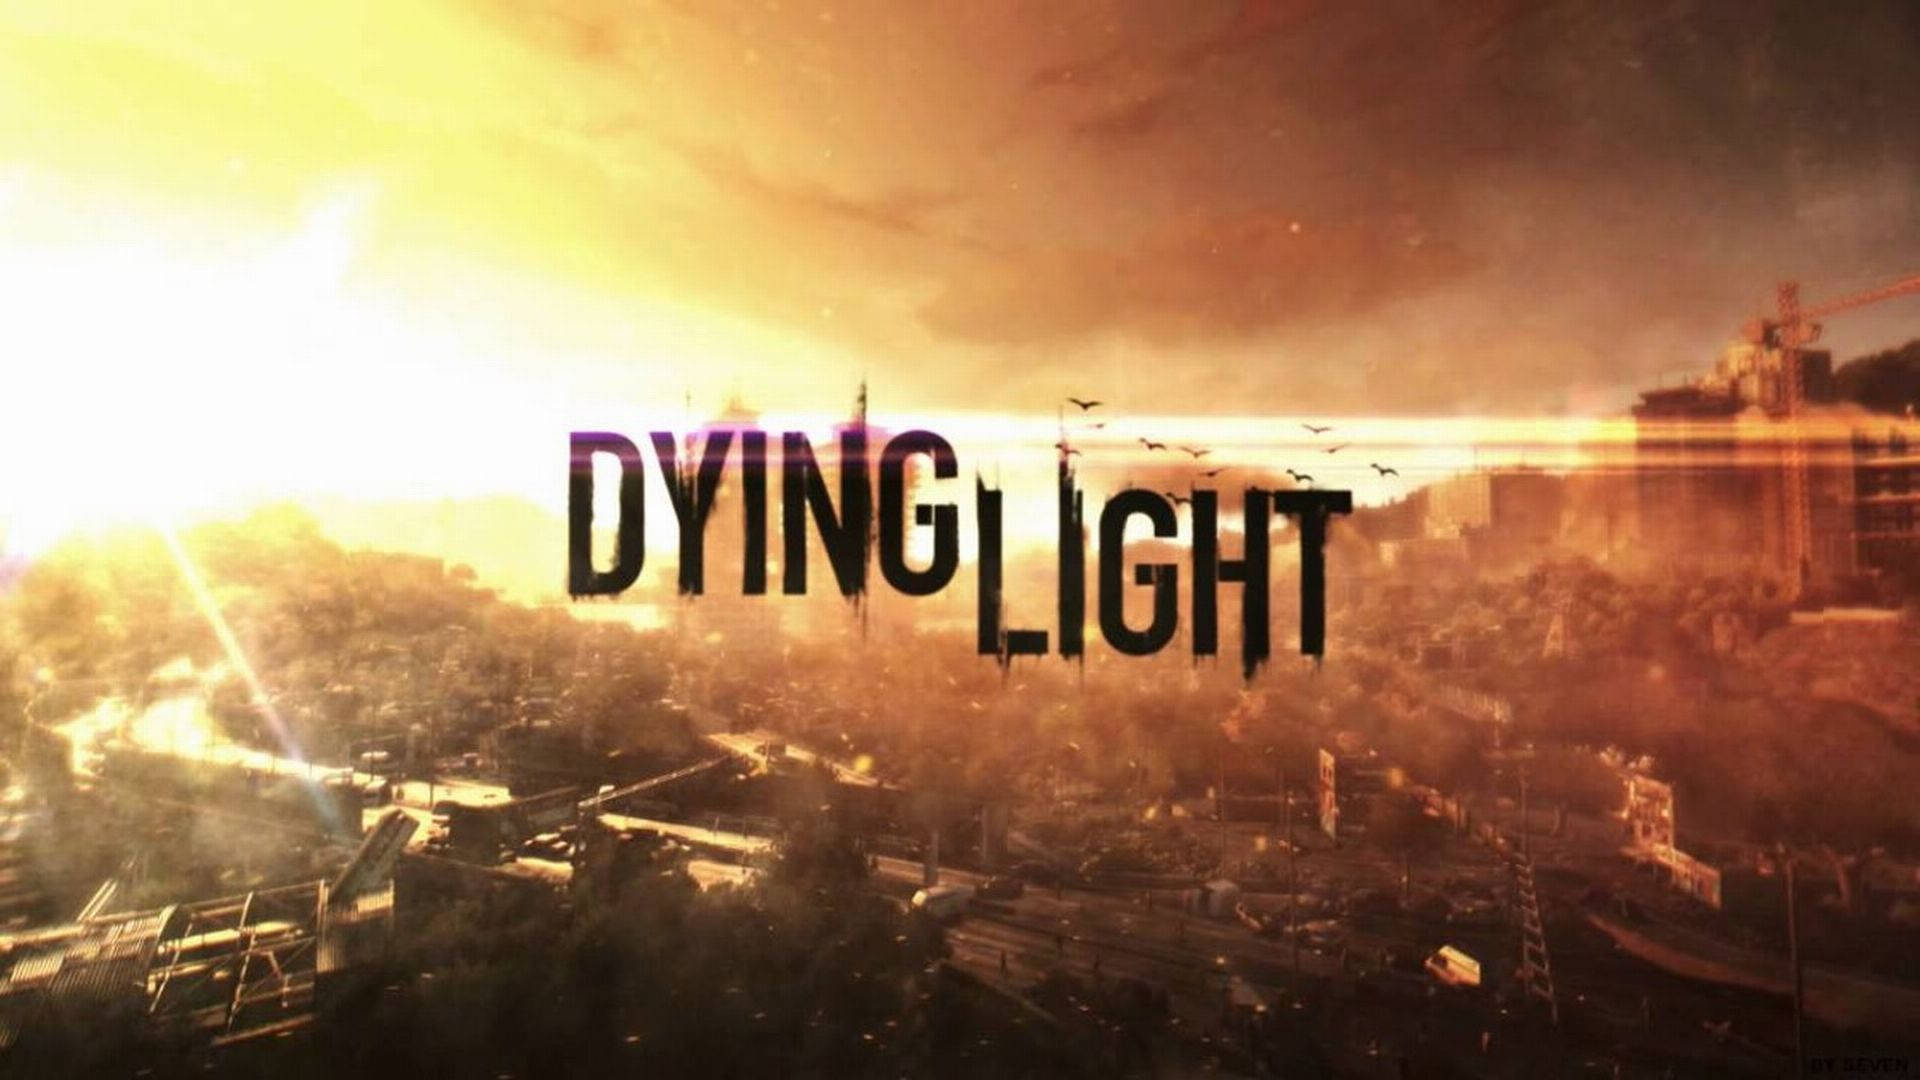 Dying Light Eerie City Background